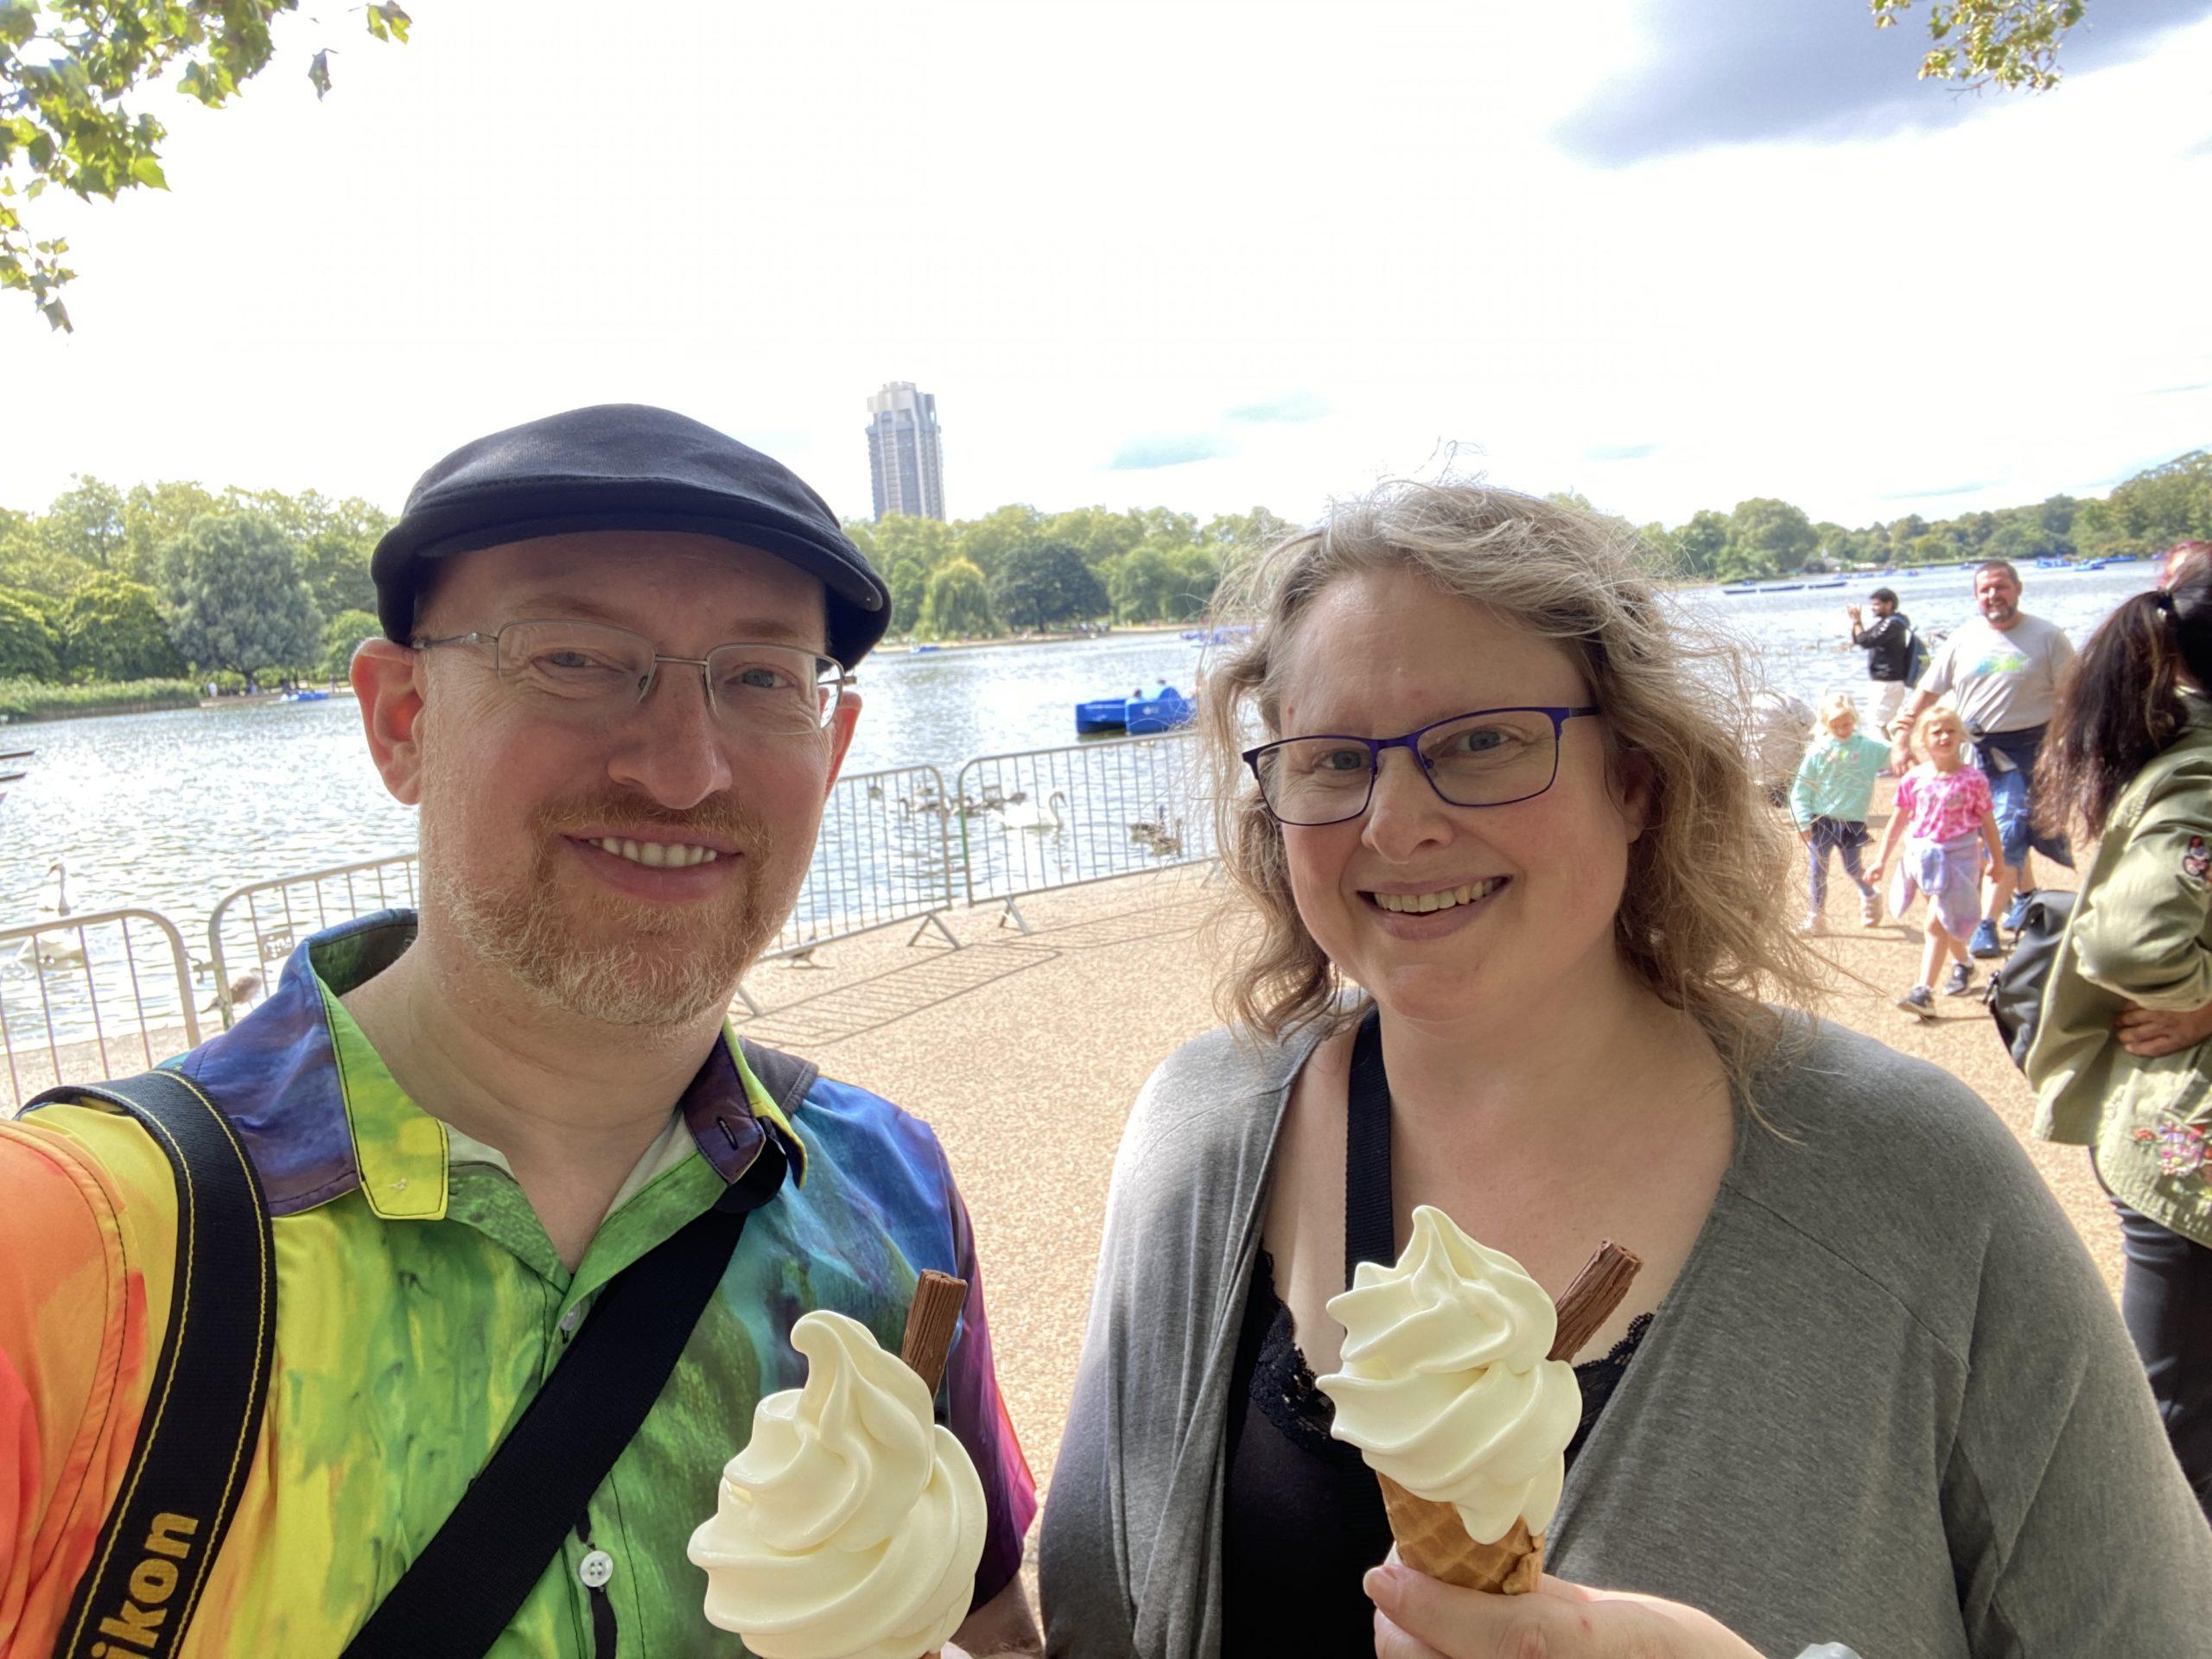 My wife and I holding soft-serve ice cream cones with flakey chocolate sticks in them in front of the lake at Hyde Park.